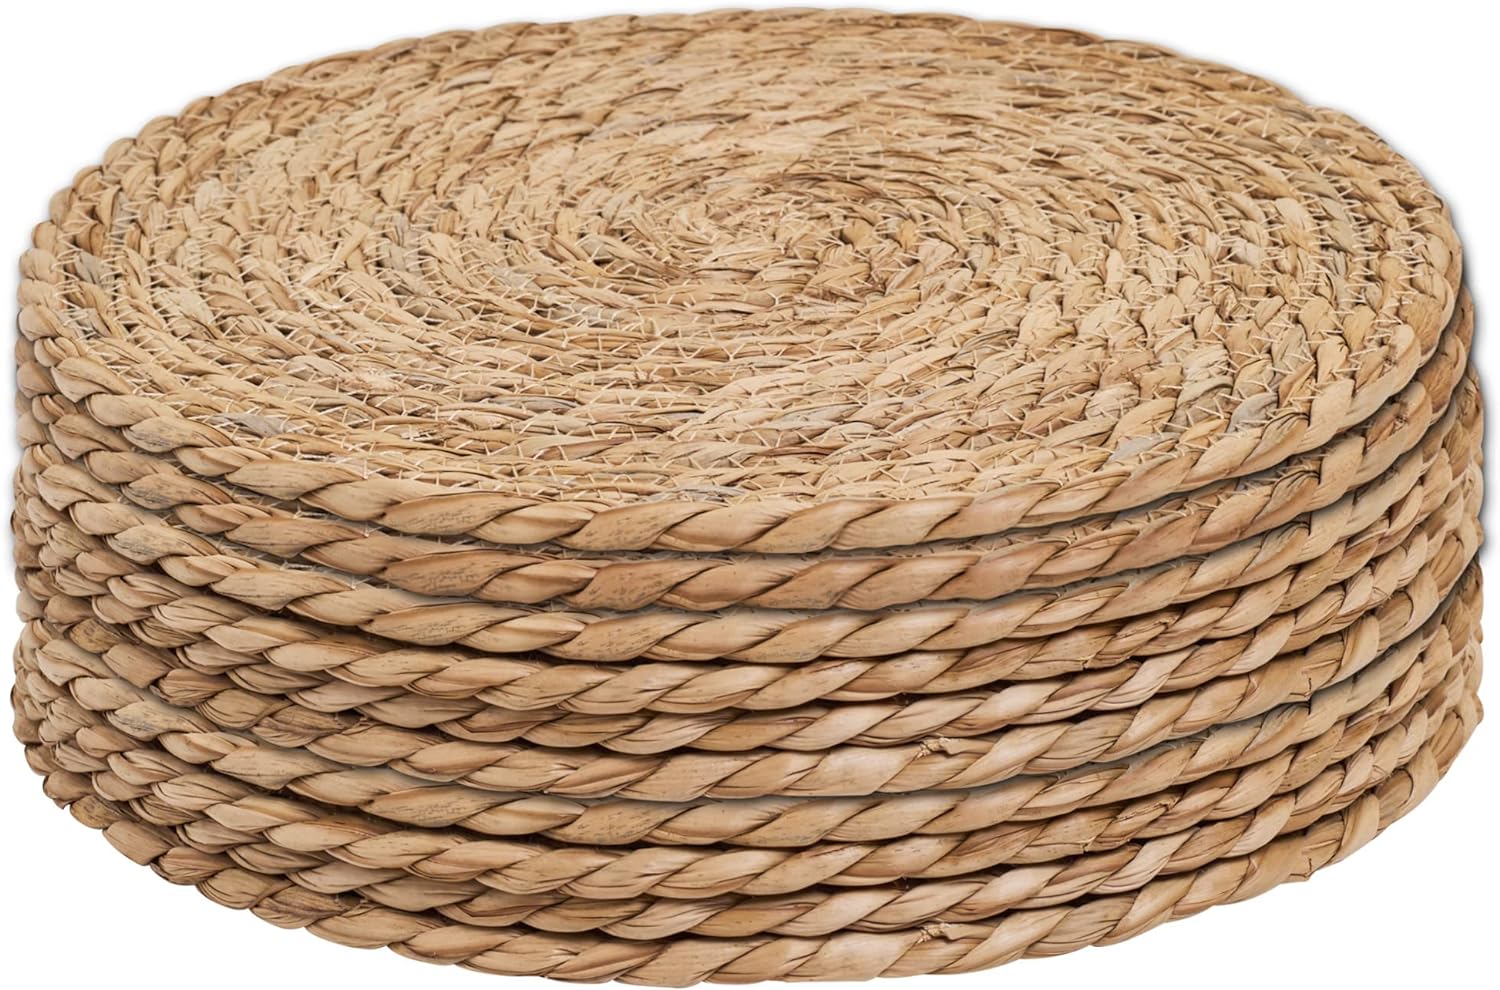 Bulk 10 Pcs Farmhouse Woven Placemats Set 12 inch Round Rattan and Water Hyacinth Placemats Rustic Braided Table Mats for Dining Home and Wedding Wholesale